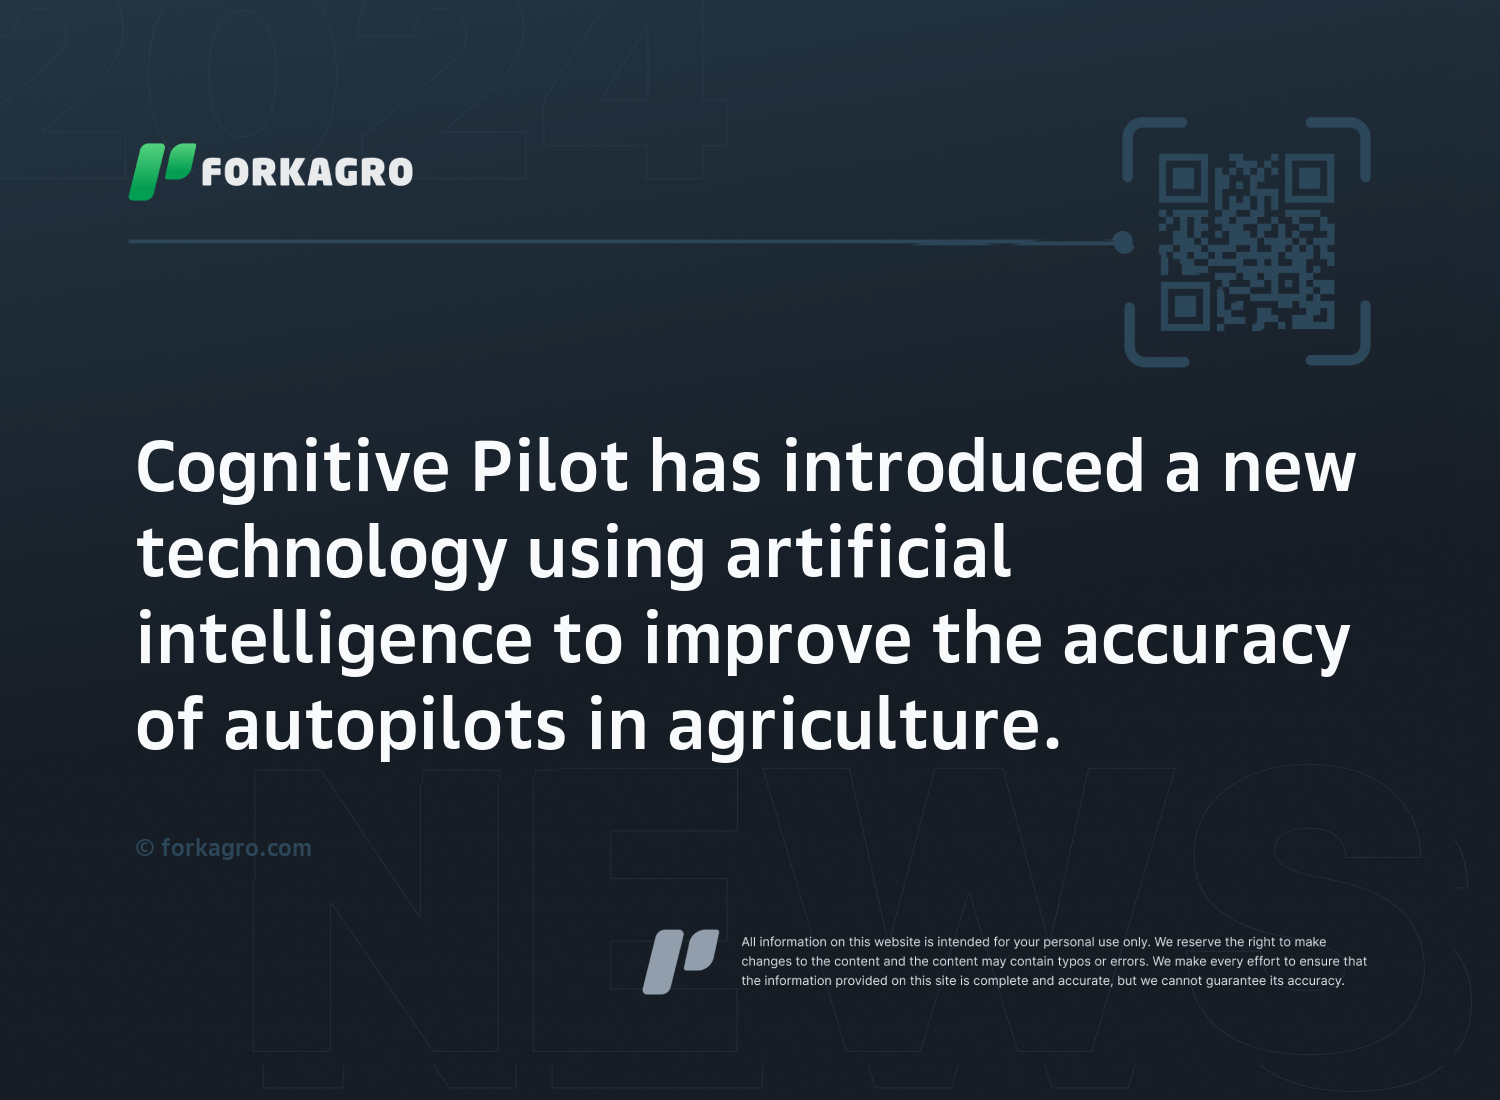 Cognitive Pilot has introduced a new technology using artificial intelligence to improve the accuracy of autopilots in agriculture.